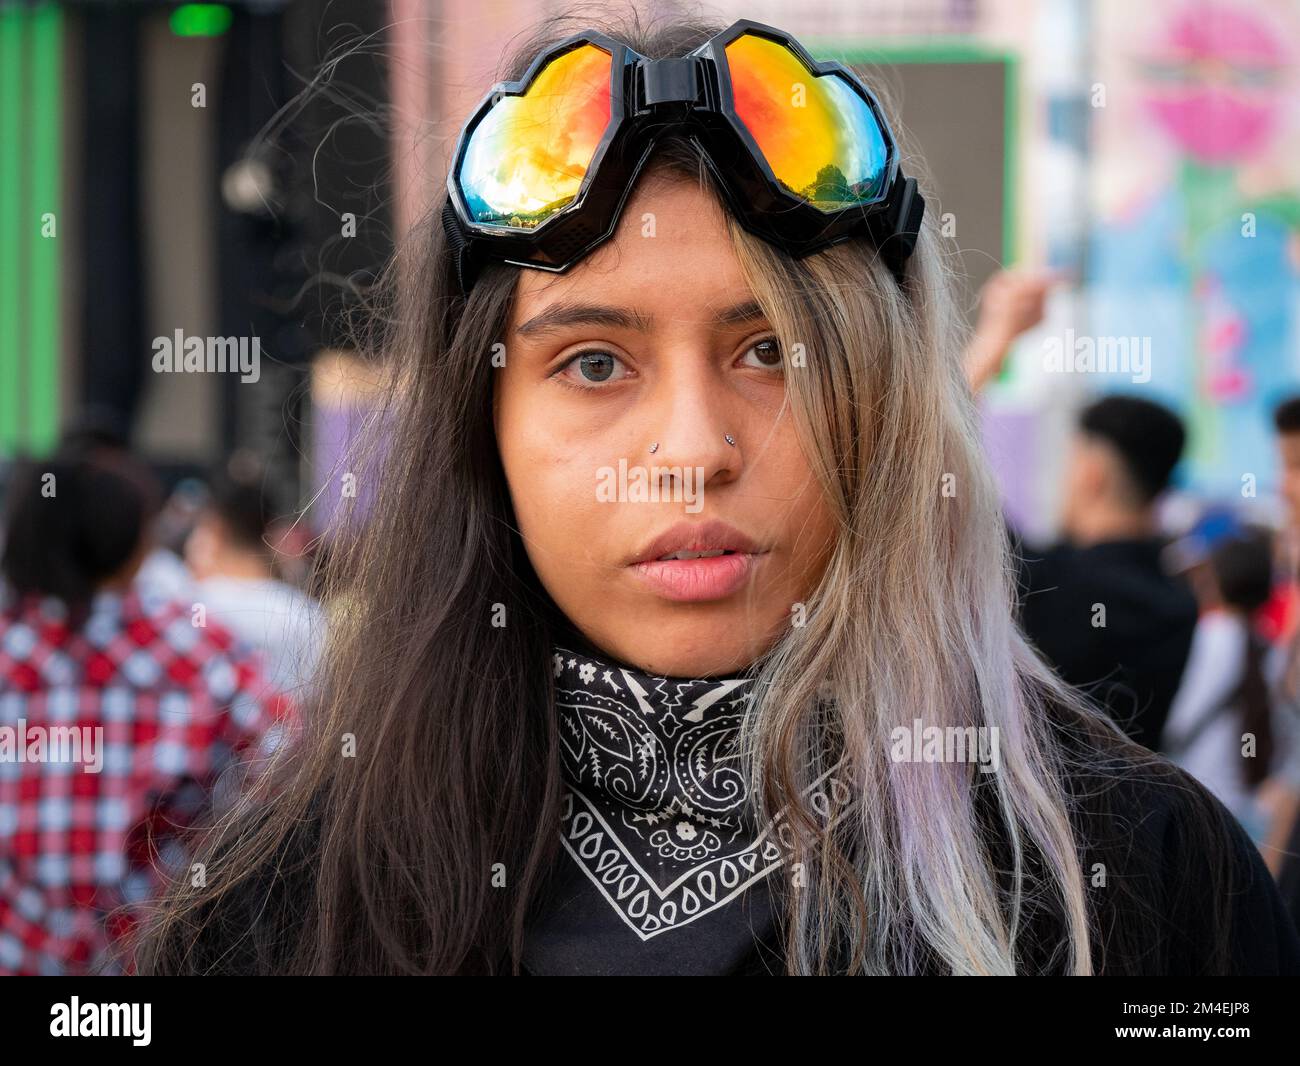 Medellin, Antioquia, Colombia - November 14 2022: Portrait of a Young Colombian Woman with Heterochromia Wears Colored Glasses in the Shape of a Heart Stock Photo